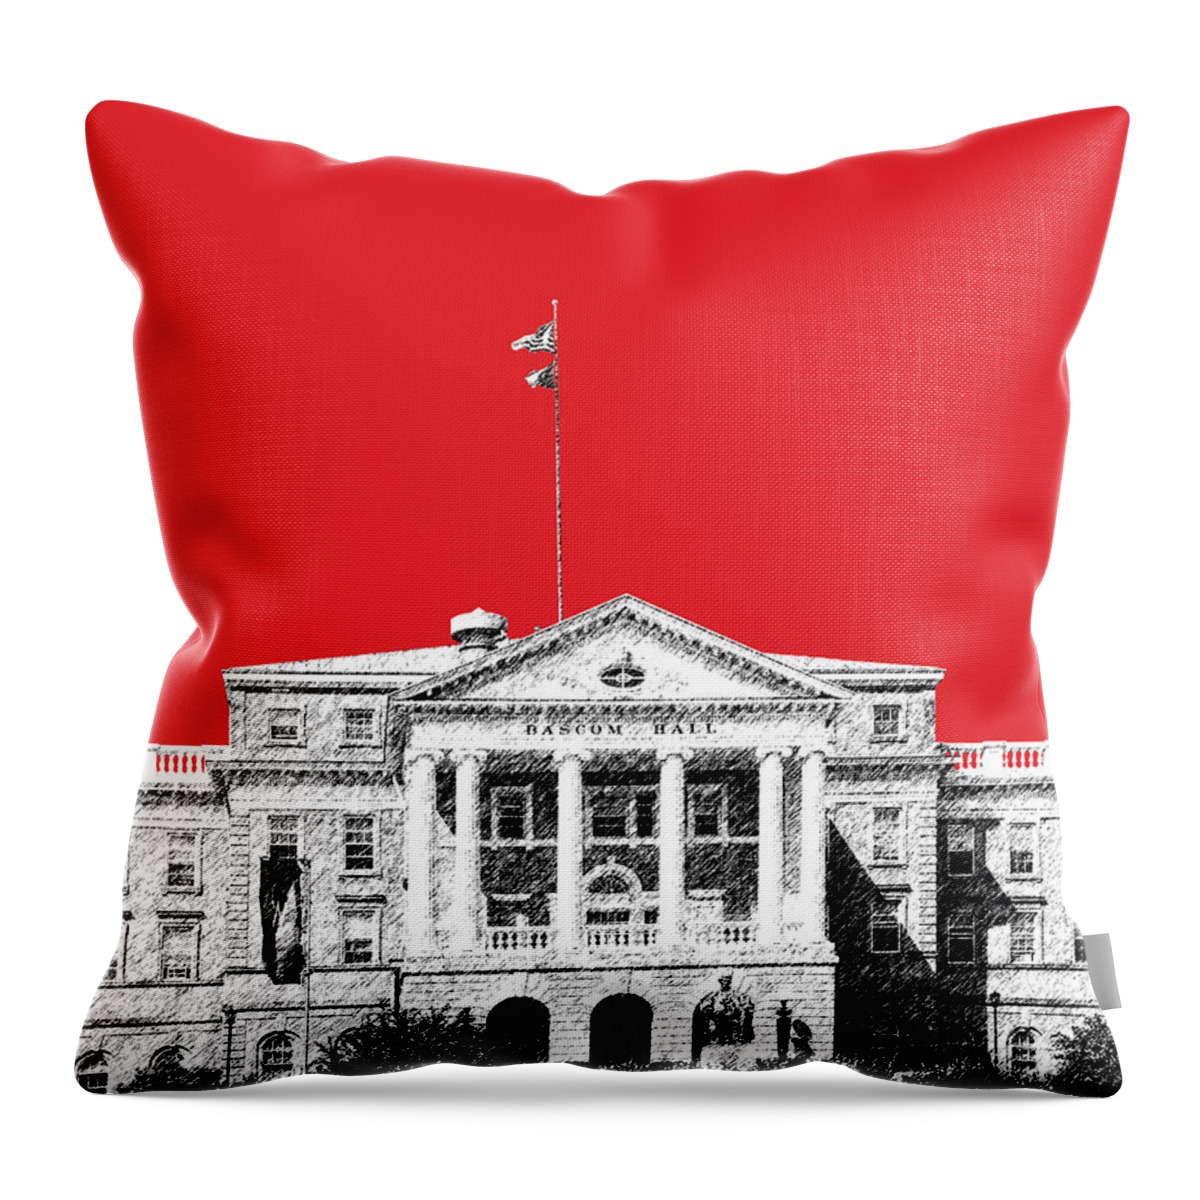 University Throw Pillow featuring the digital art University of Wisconsin - Red by DB Artist